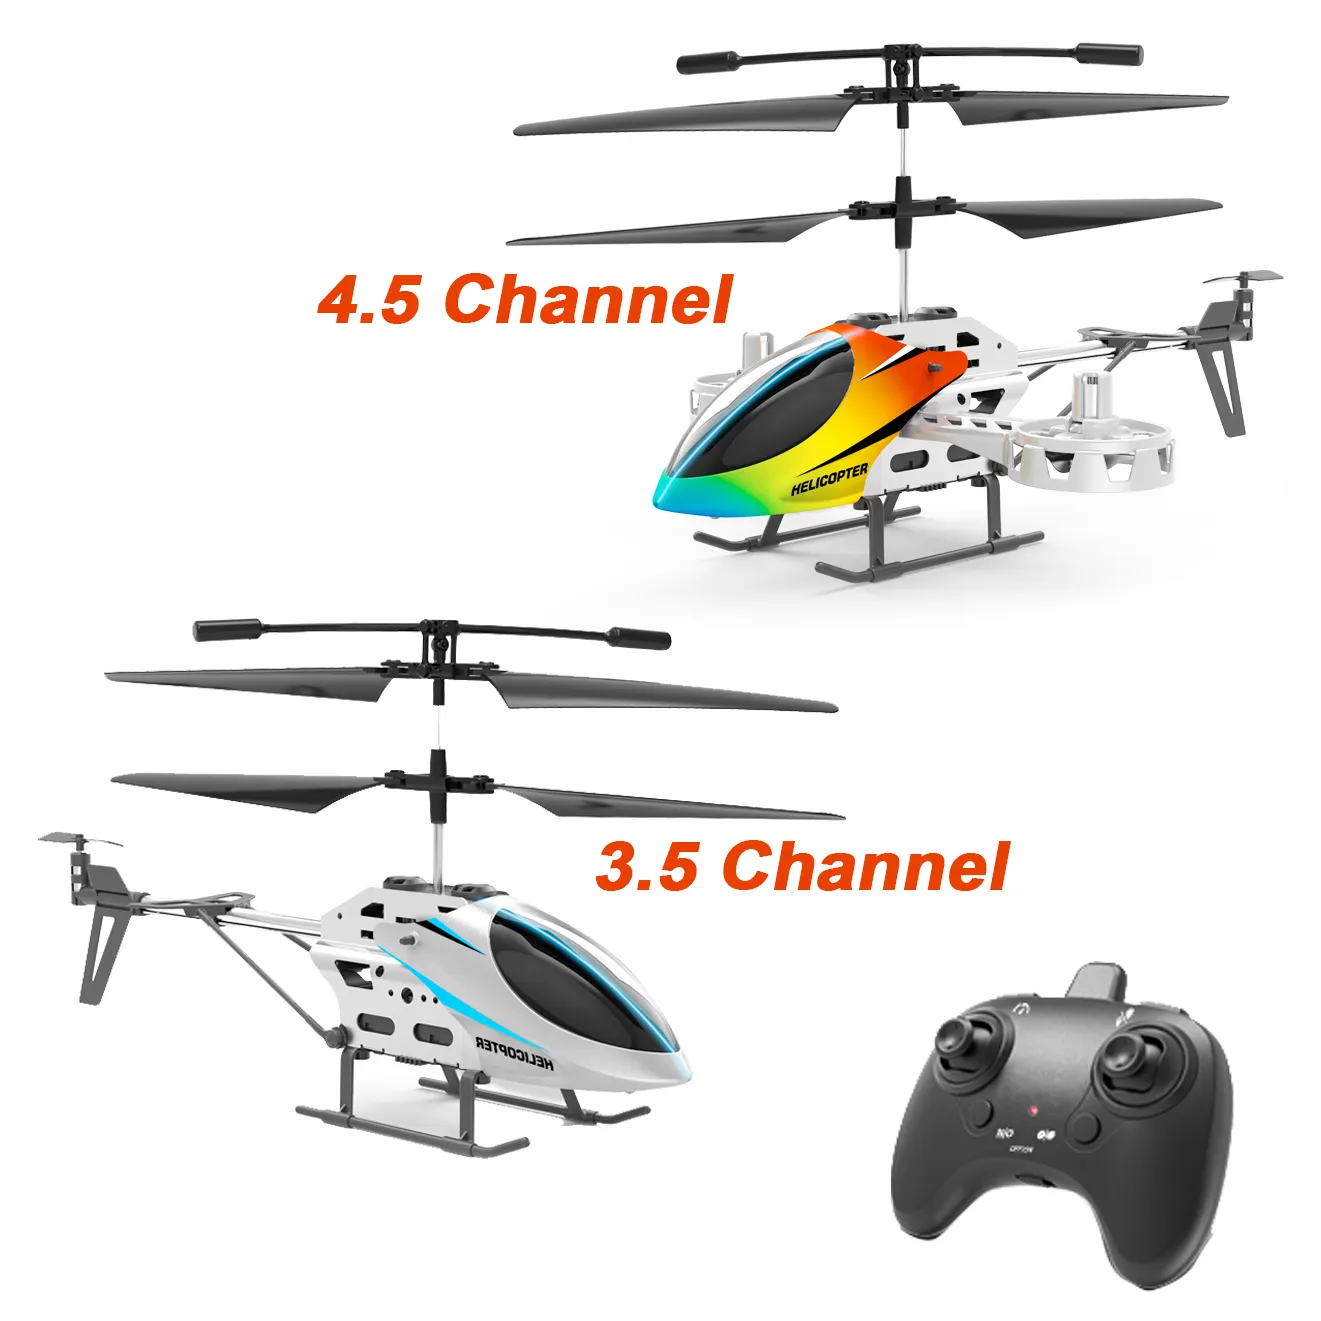 4.5ch/3.5ch 3.7V300mah battery 8mins flying time altitude hold helicopters toys rc helicopters